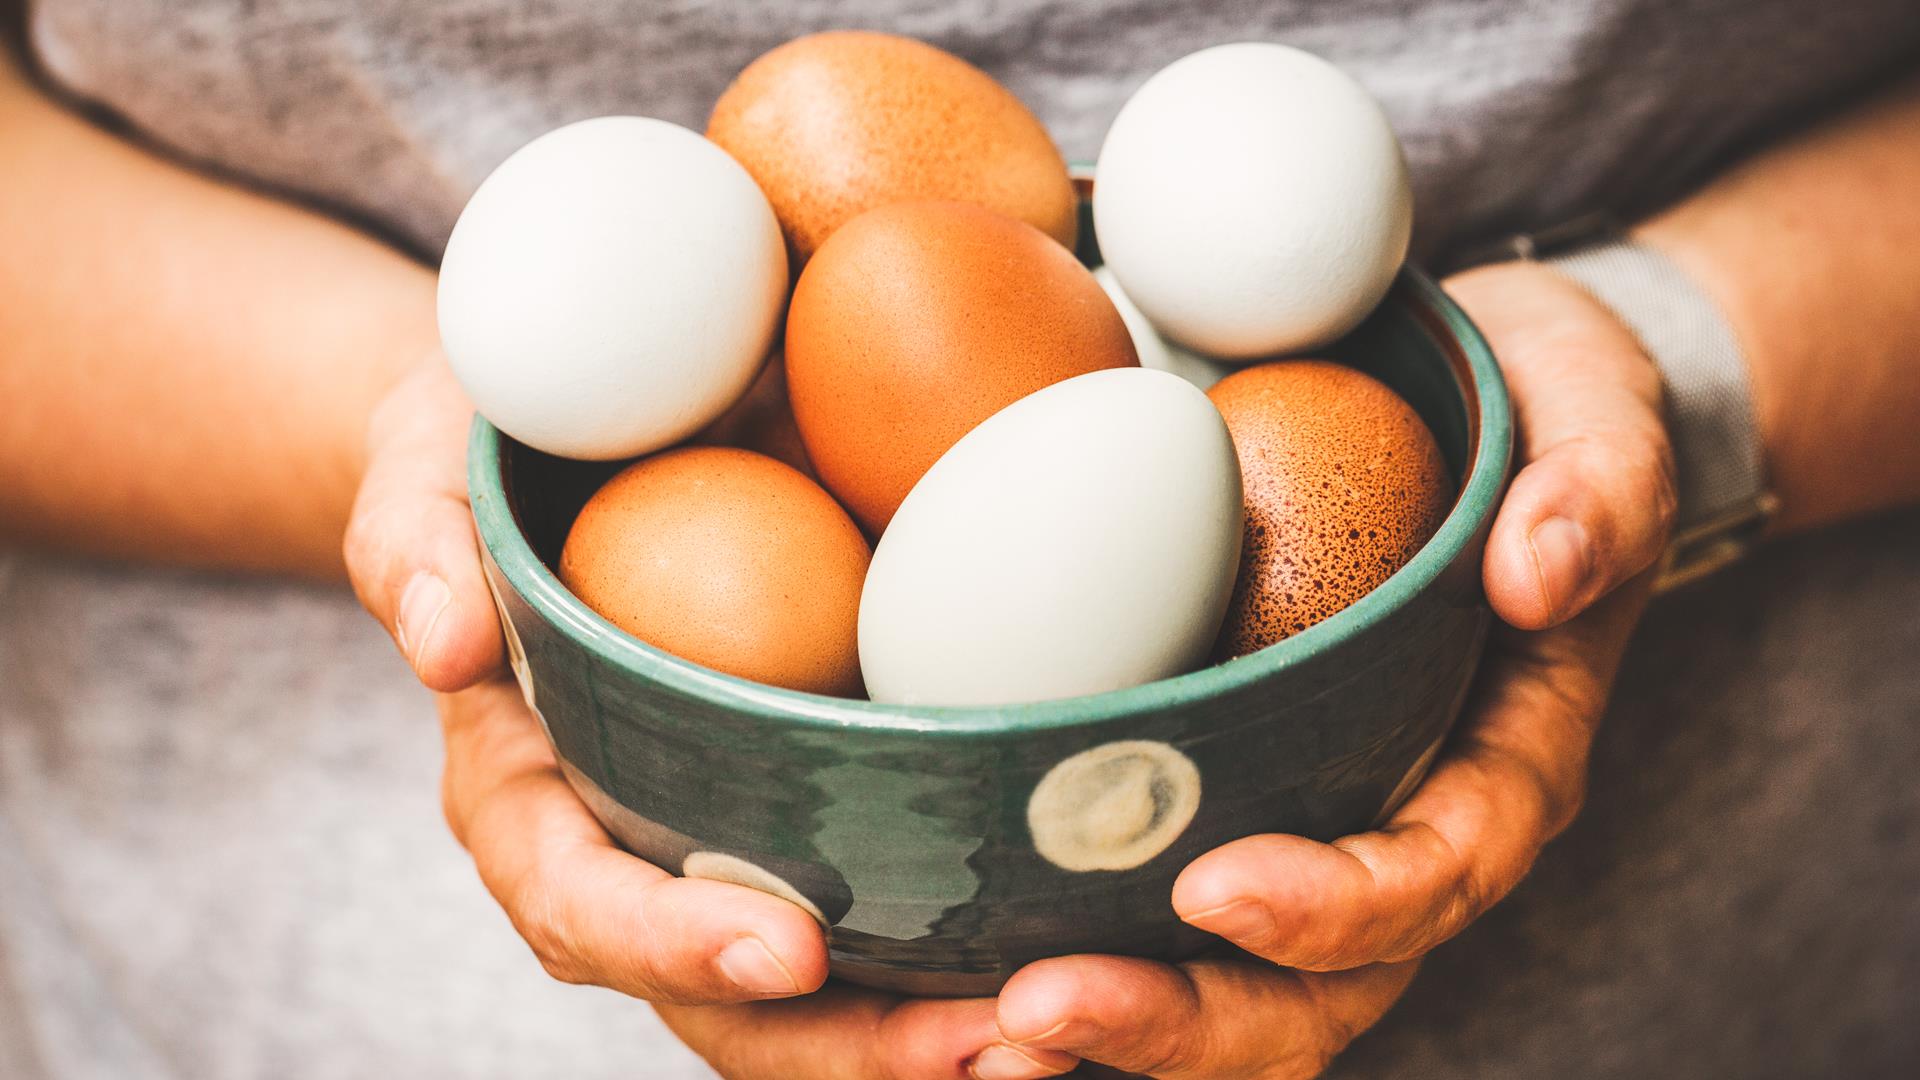 Are eggs bad for you? Scientists explain if eating eggs every day is healthy